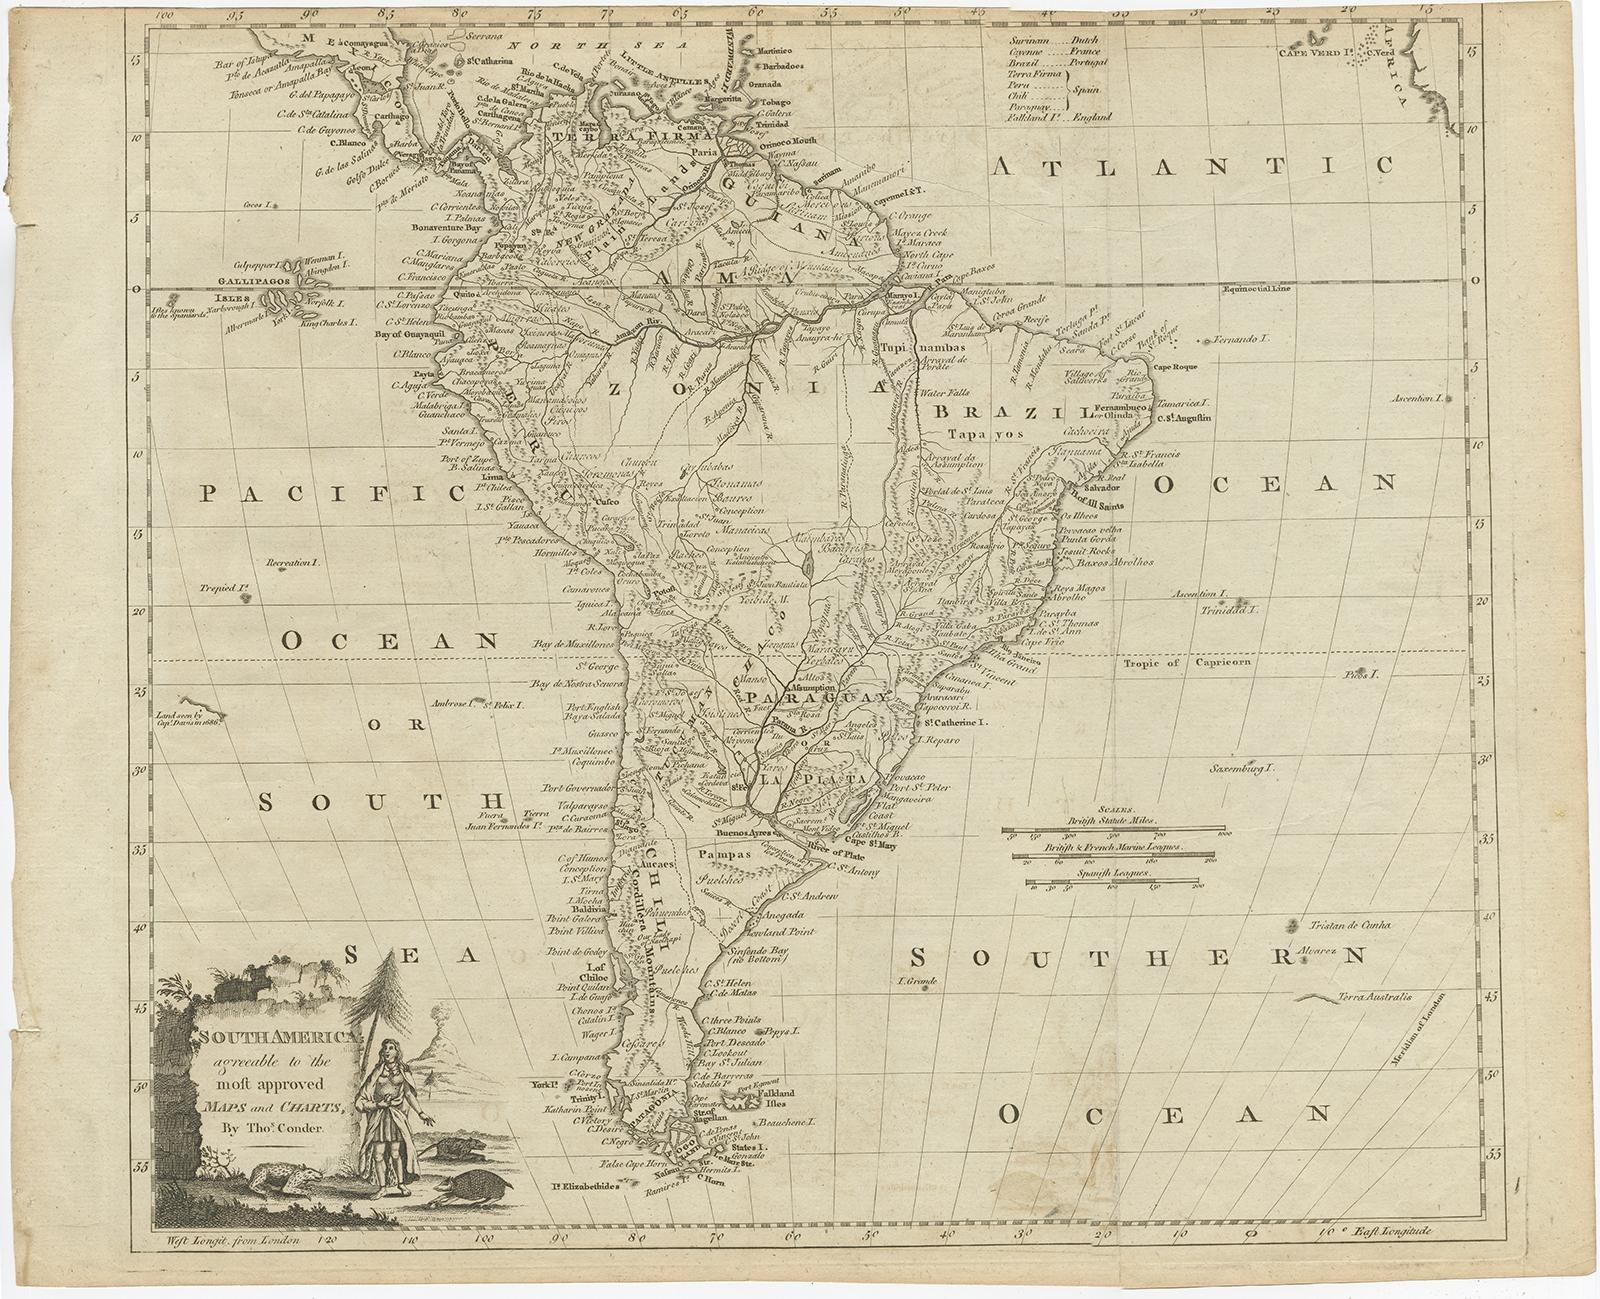 Antique map titled 'South America agreeable to the most approved maps and charts'. 

Rare map of South America depicting Chili, La Plata, Paraguay, Brazil, Peru, the Amazon and surroundings. 

Artists and Engravers: Thomas Conder (1747 - June